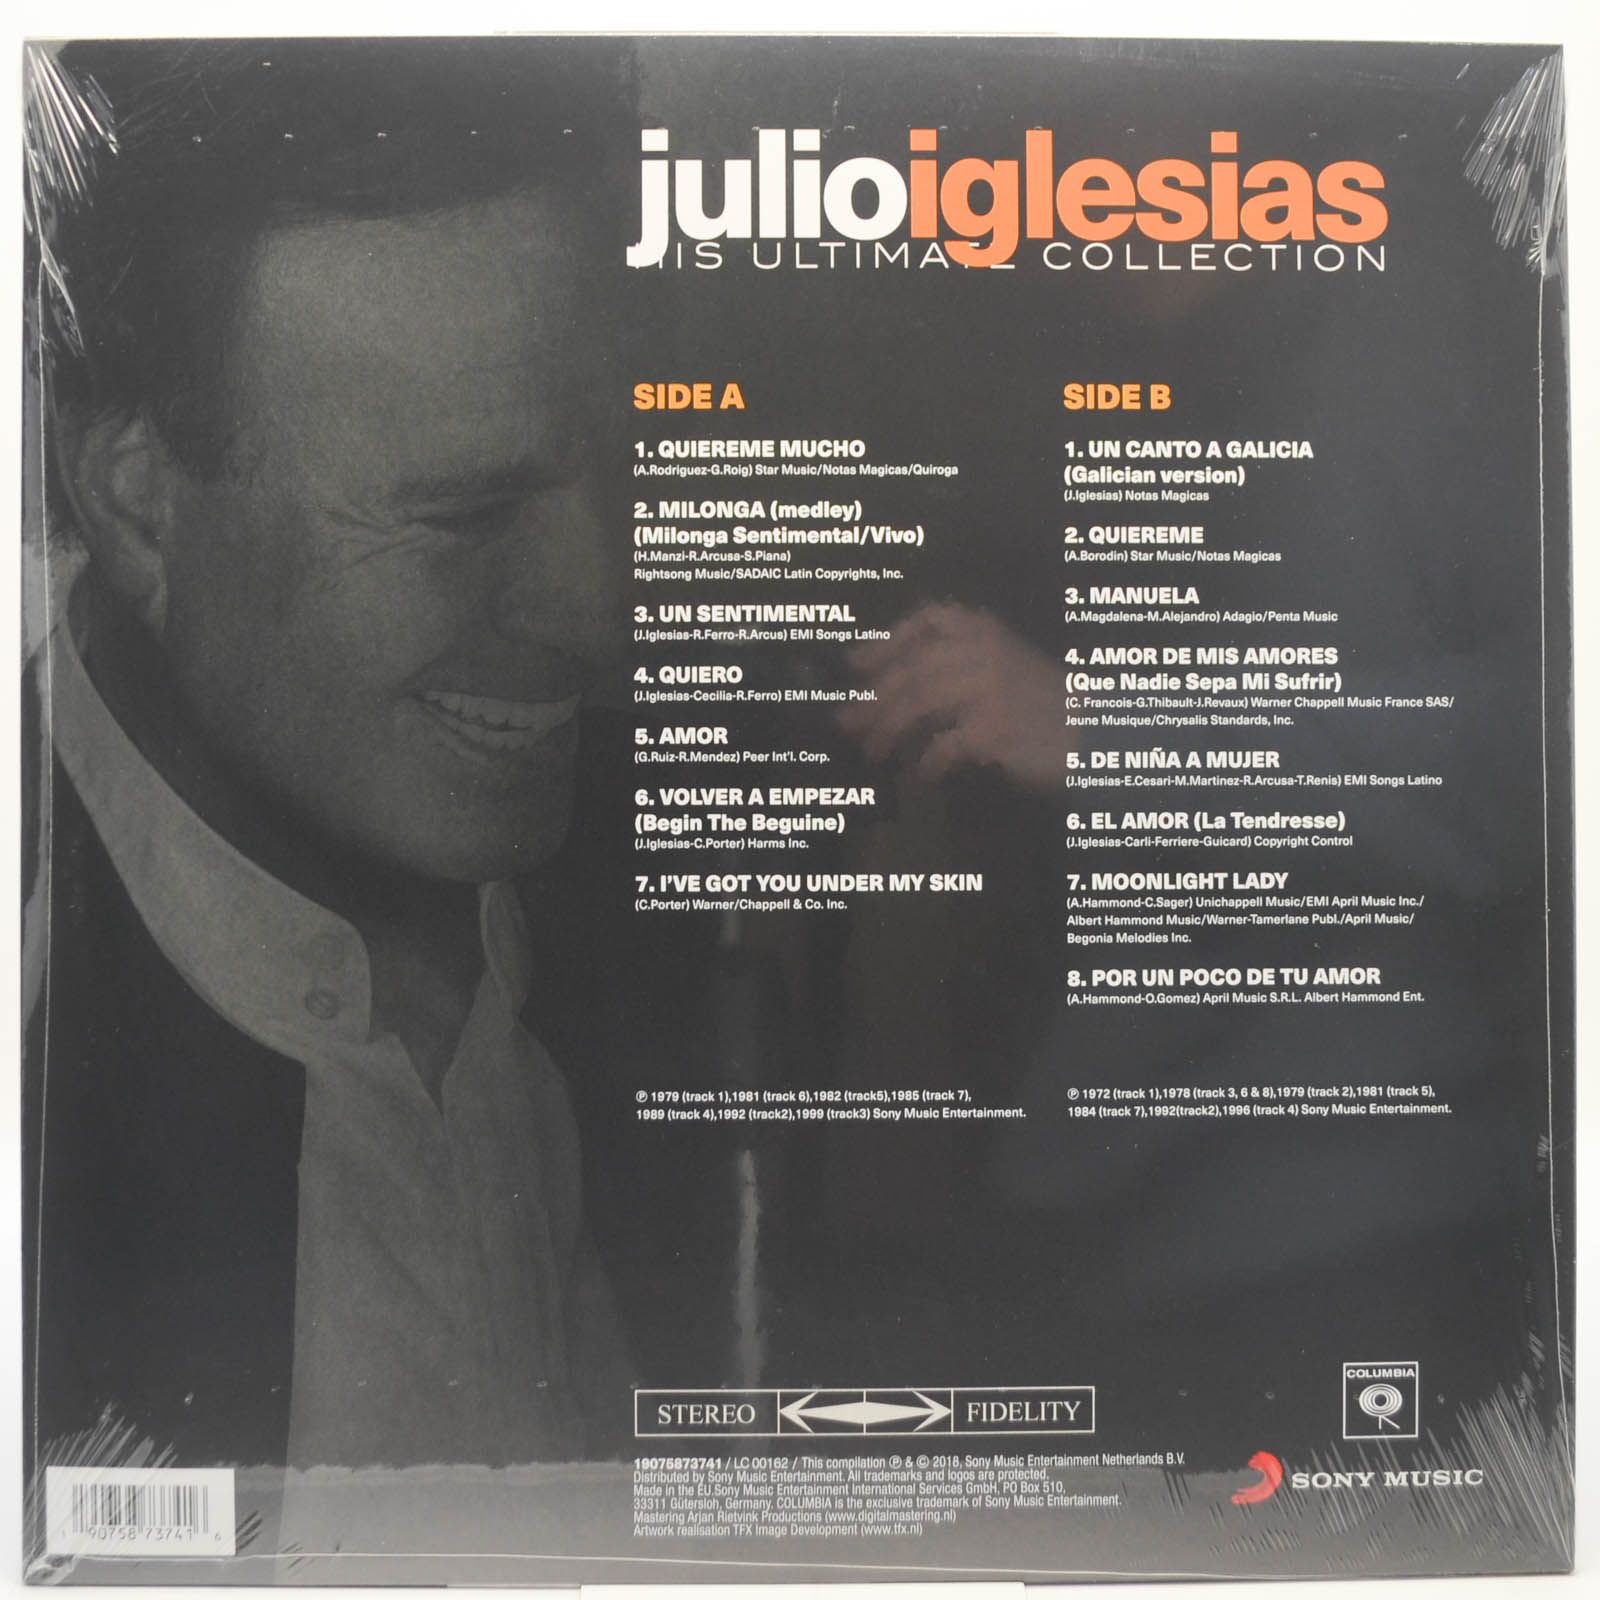 Julio Iglesias — His Ultimate Collection, 2018